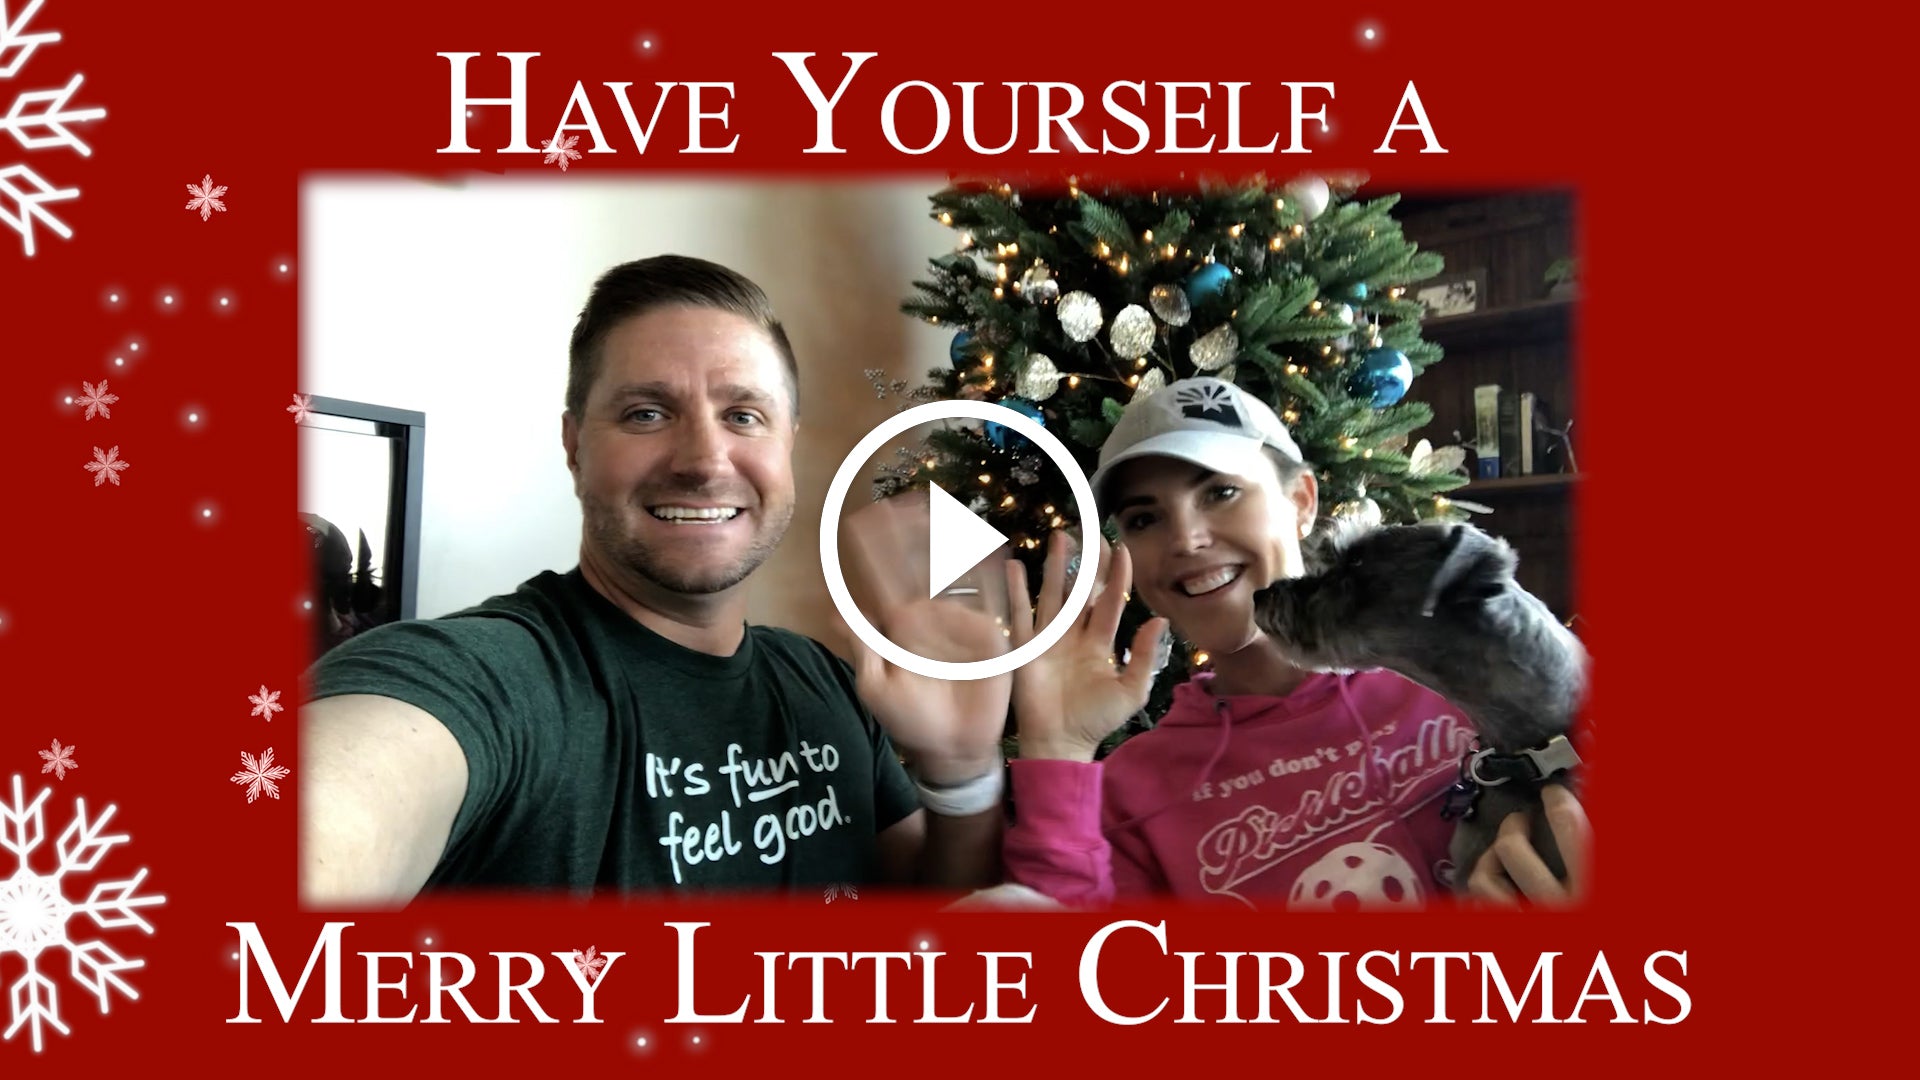 Have yourself a Merry Little Christmas [Music Video]